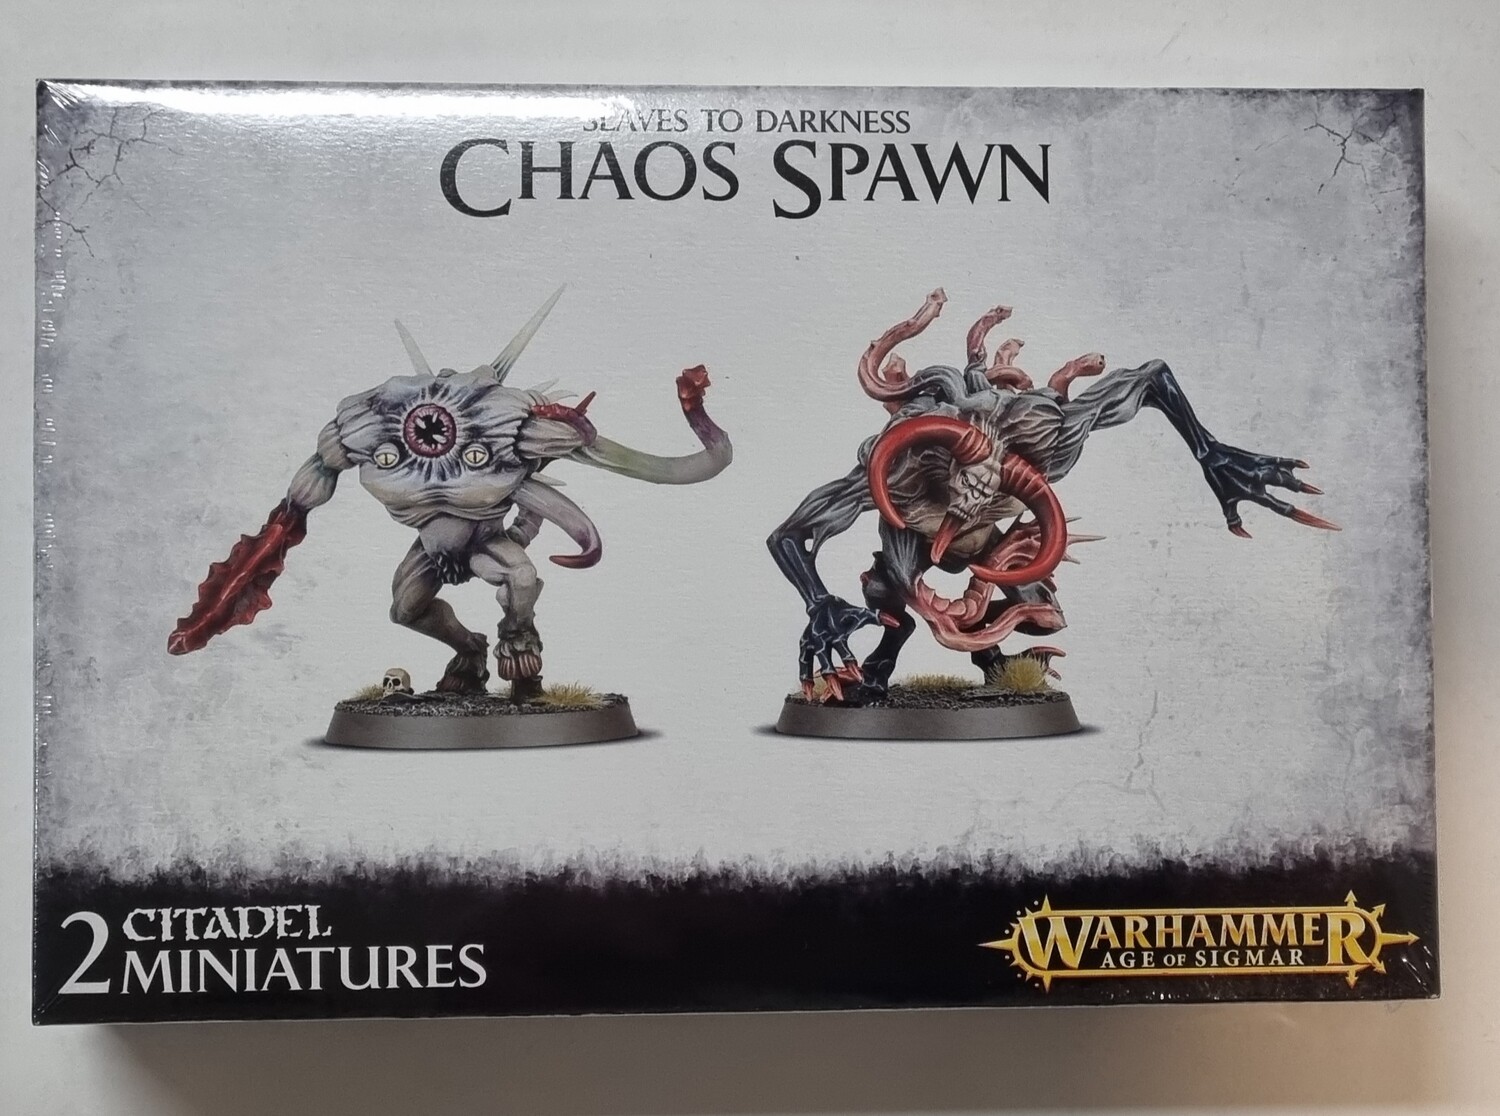 Warhammer Age of Sigmar, Slaves to Darkness: Chaos Spawn